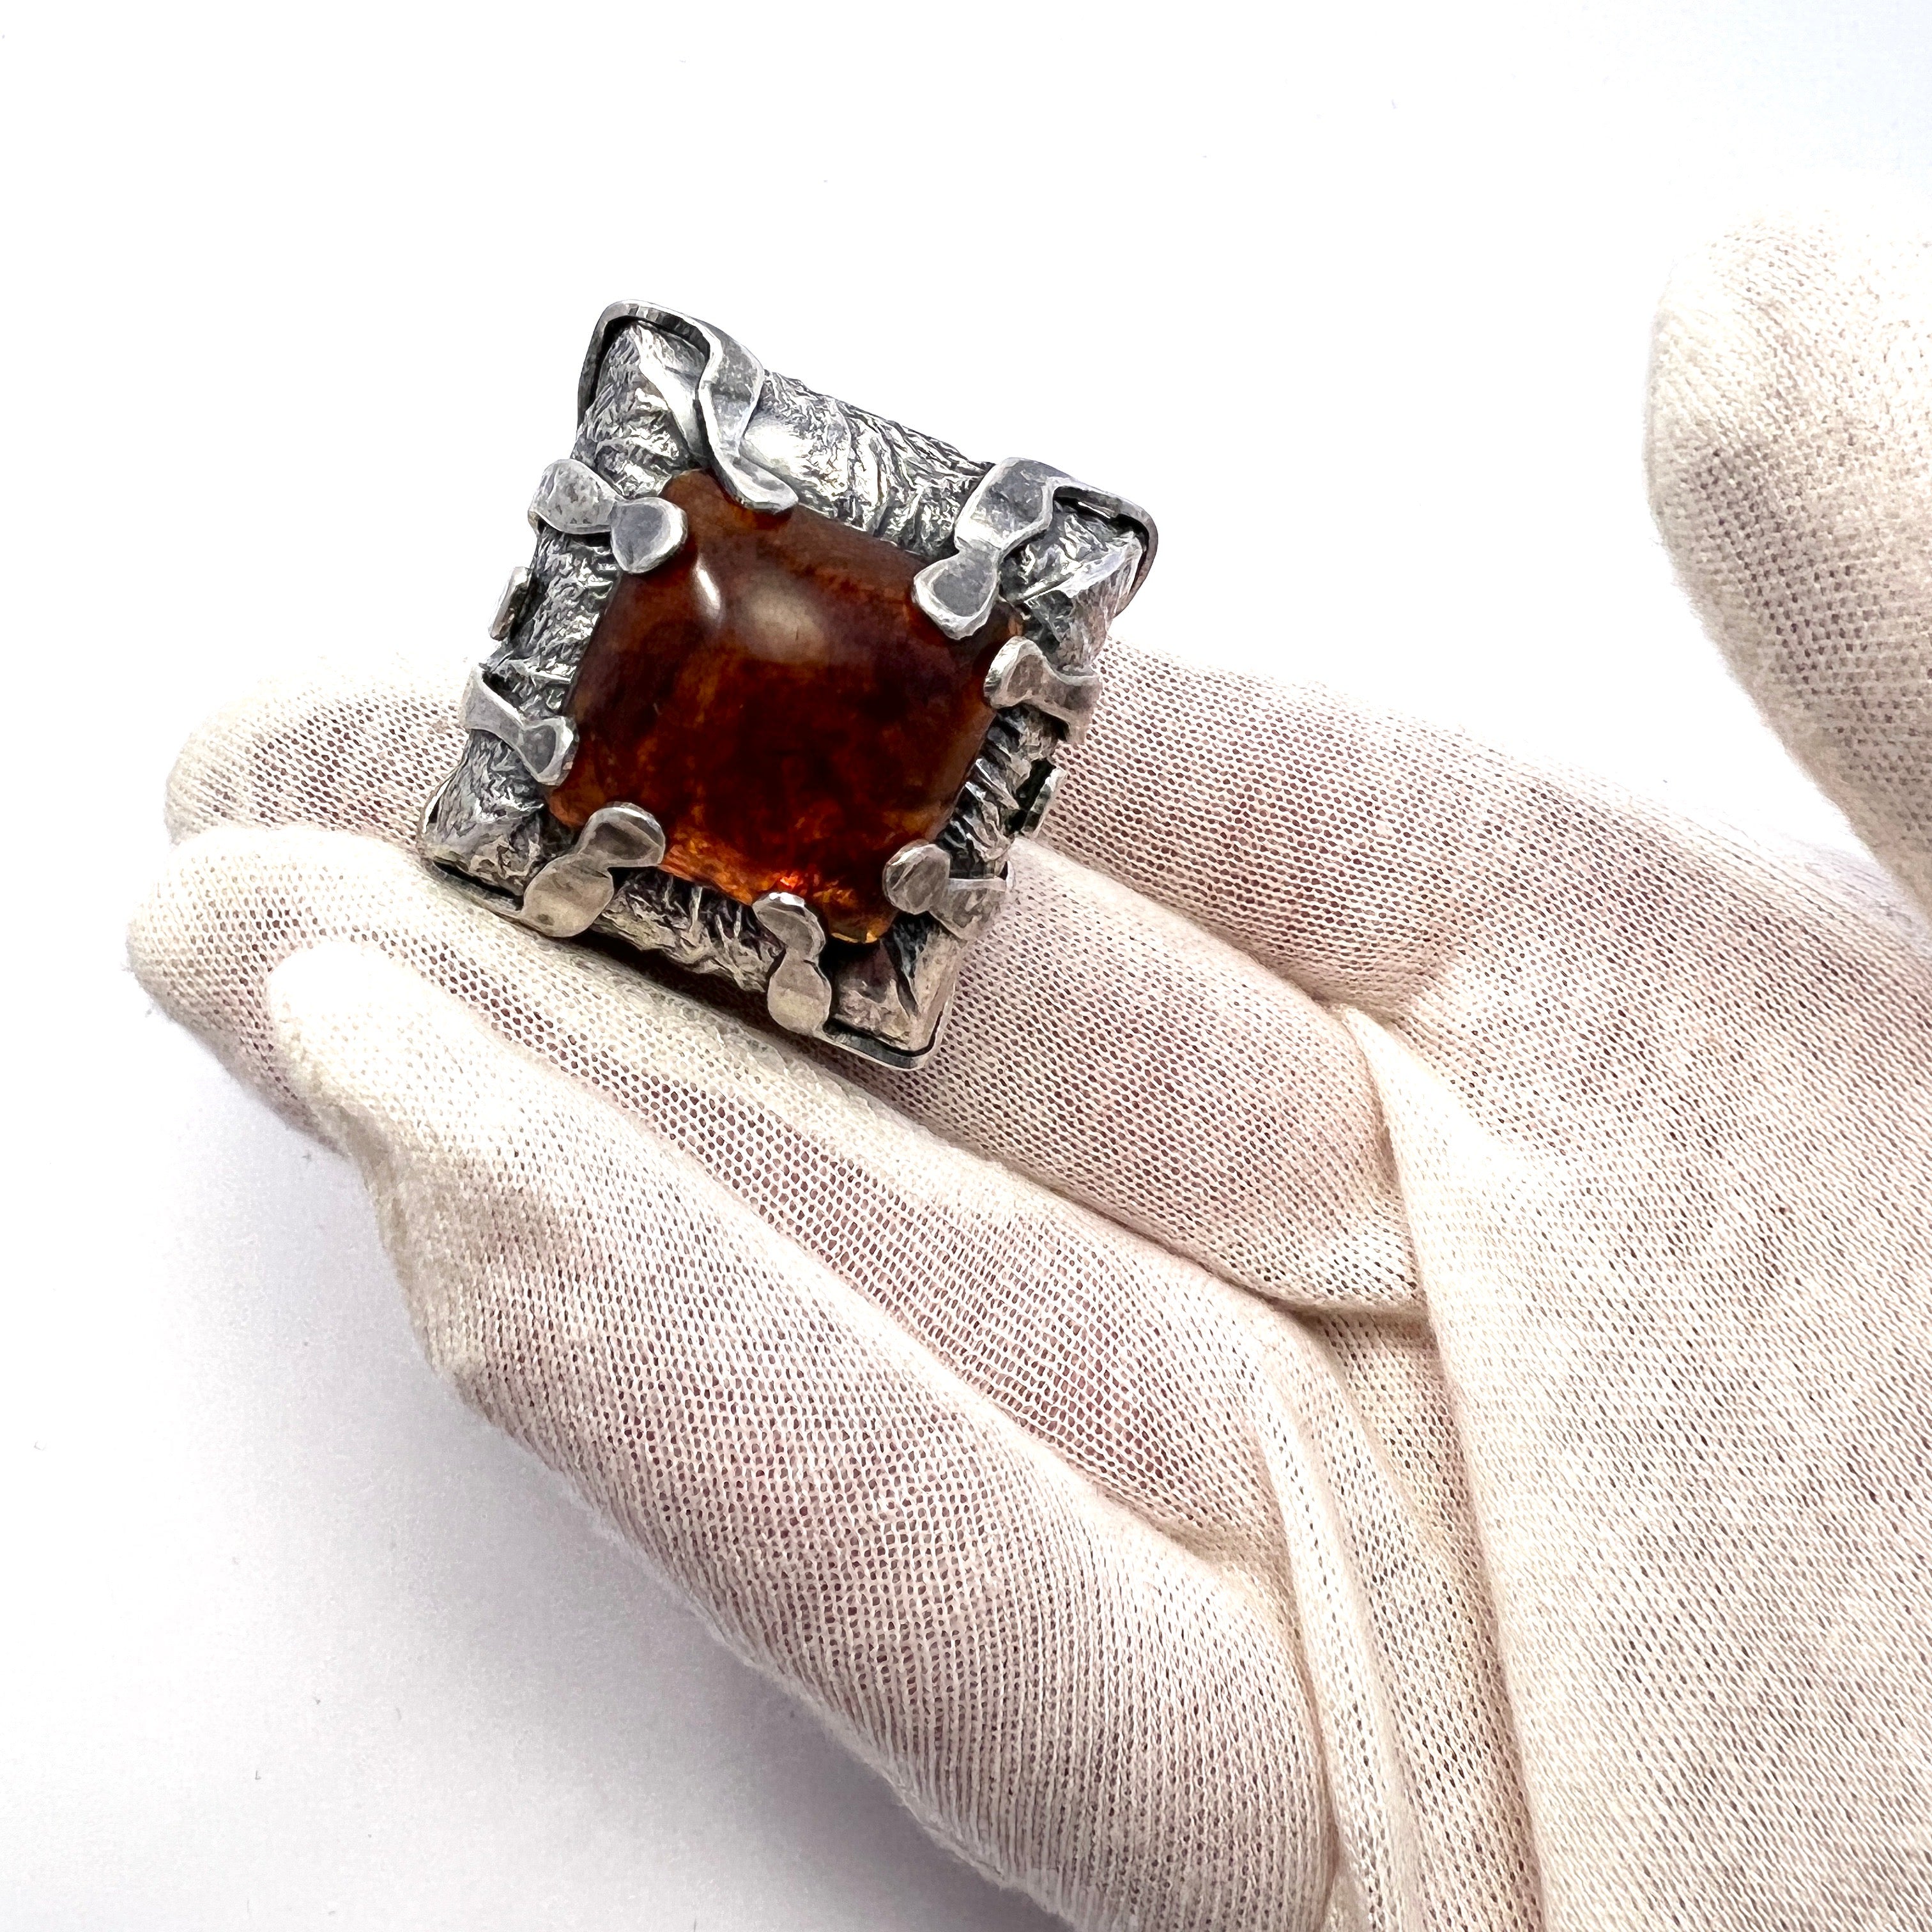 ORNO, Poland 1960s. Vintage Gigantic Solid Silver Baltic Amber Ring.